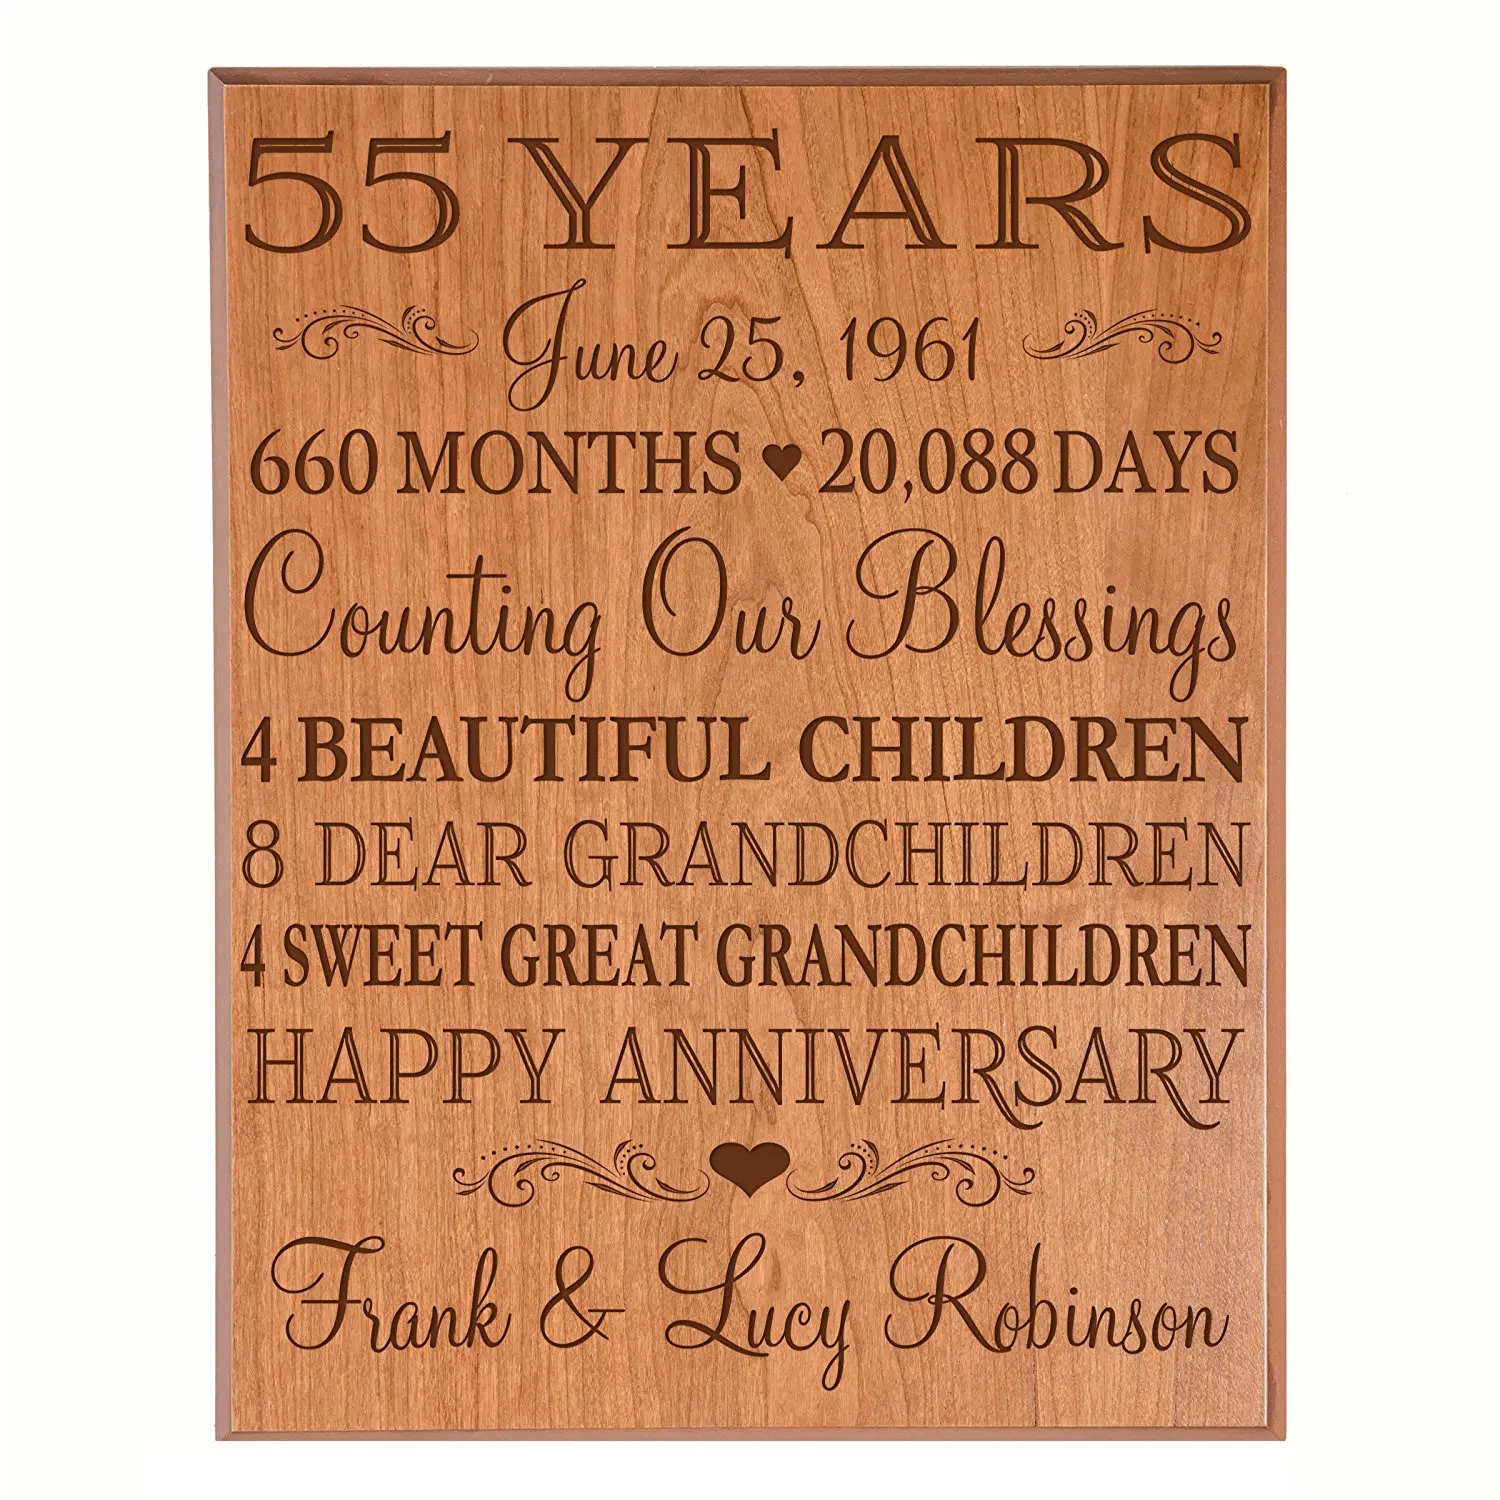 Personalized 55th Anniversary Gifts For Him Her Couple Pas Custom Made 55 Year